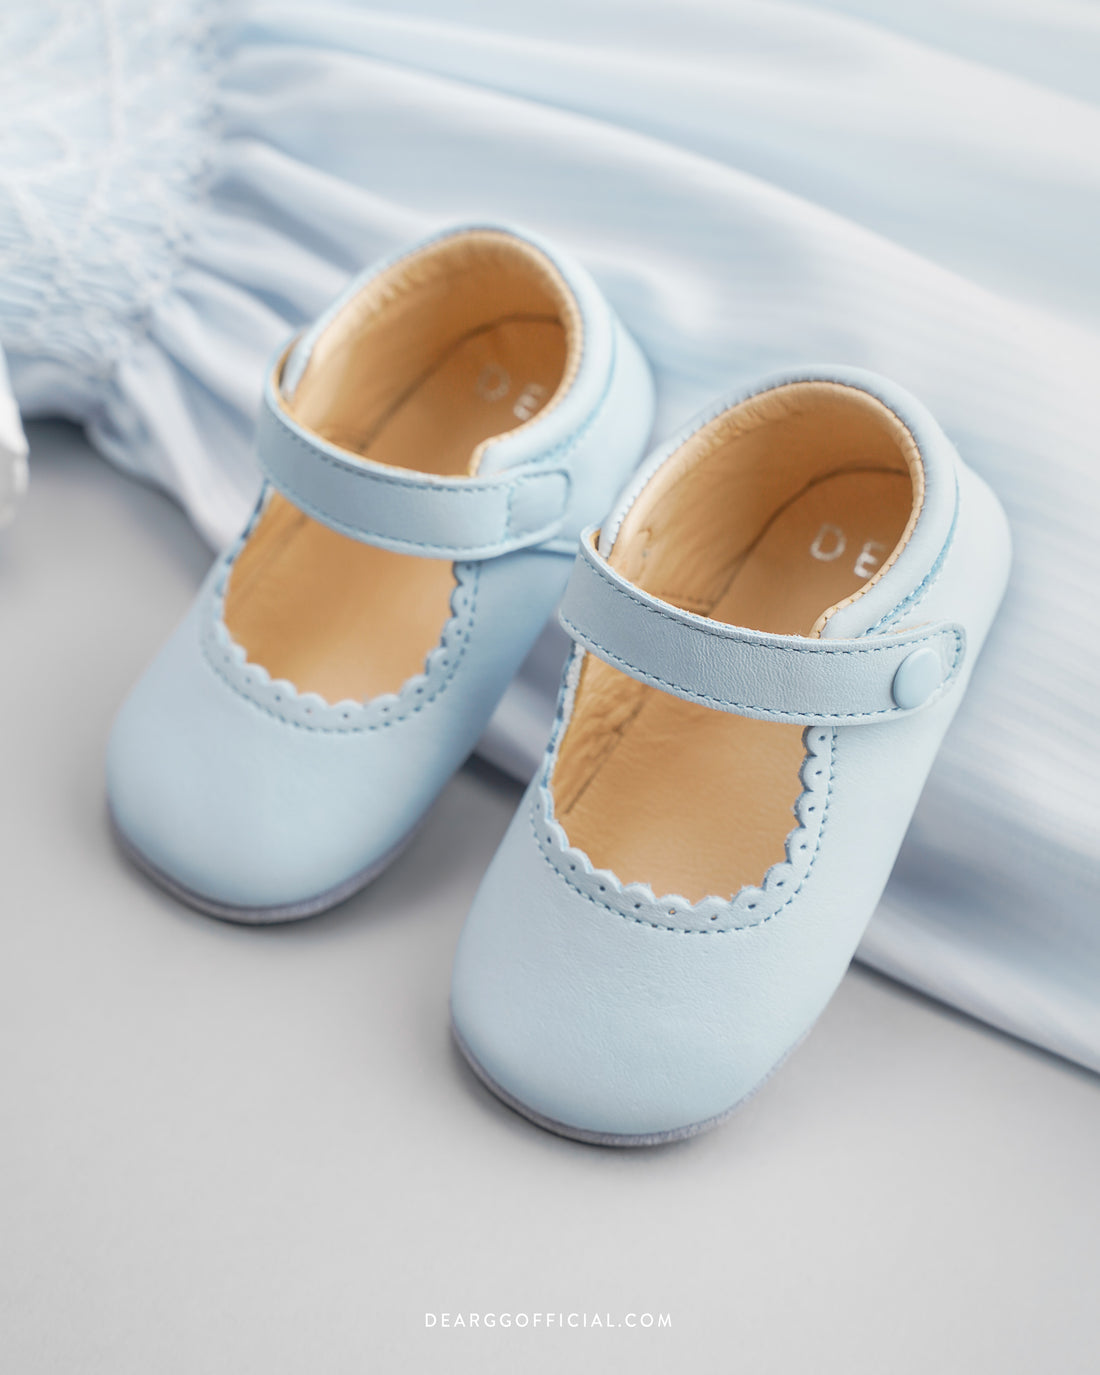 Abbey Shoes - Baby Blue